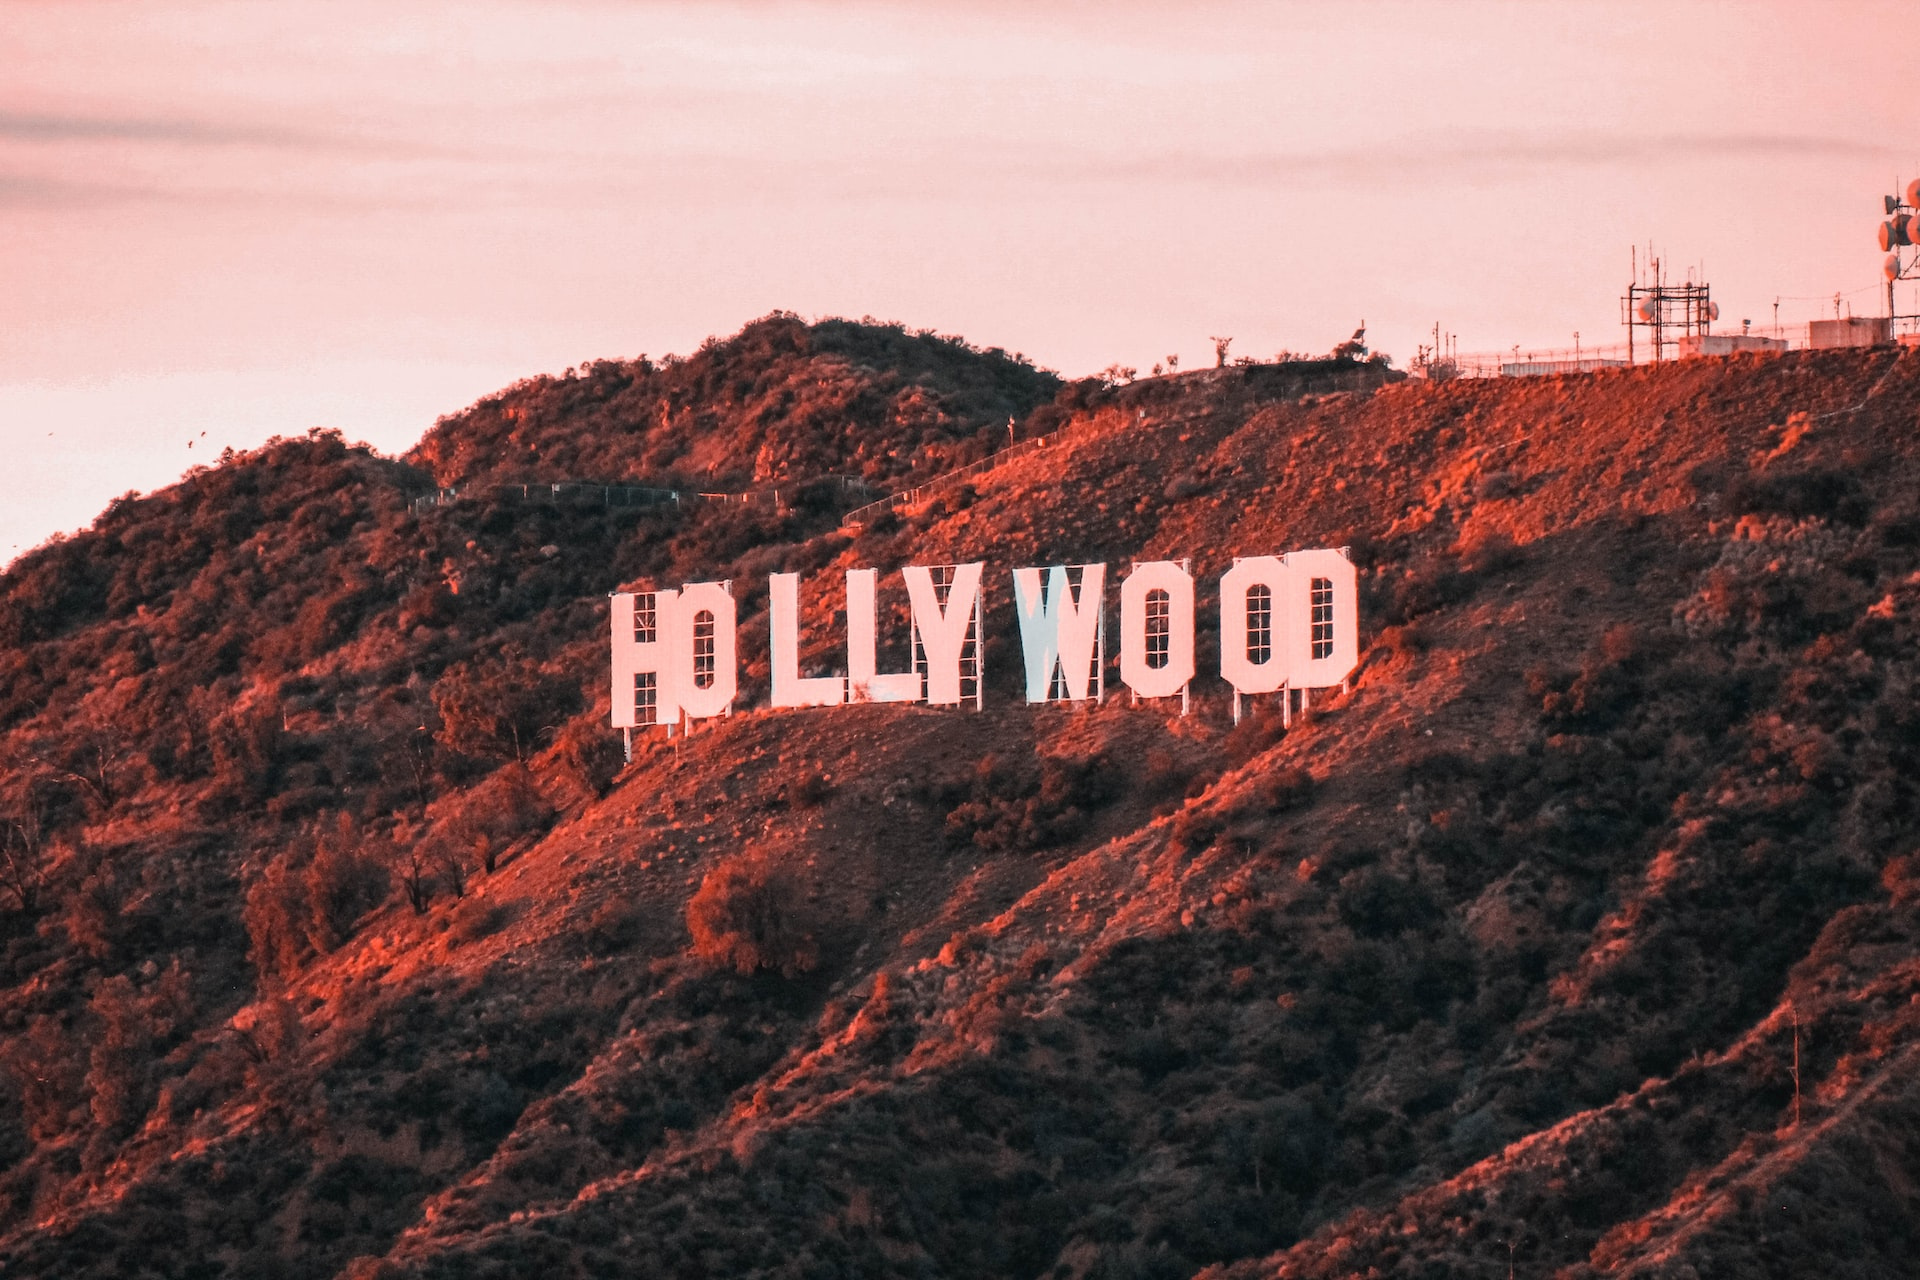 Photo of the iconic "Hollywood" sign at sunset.